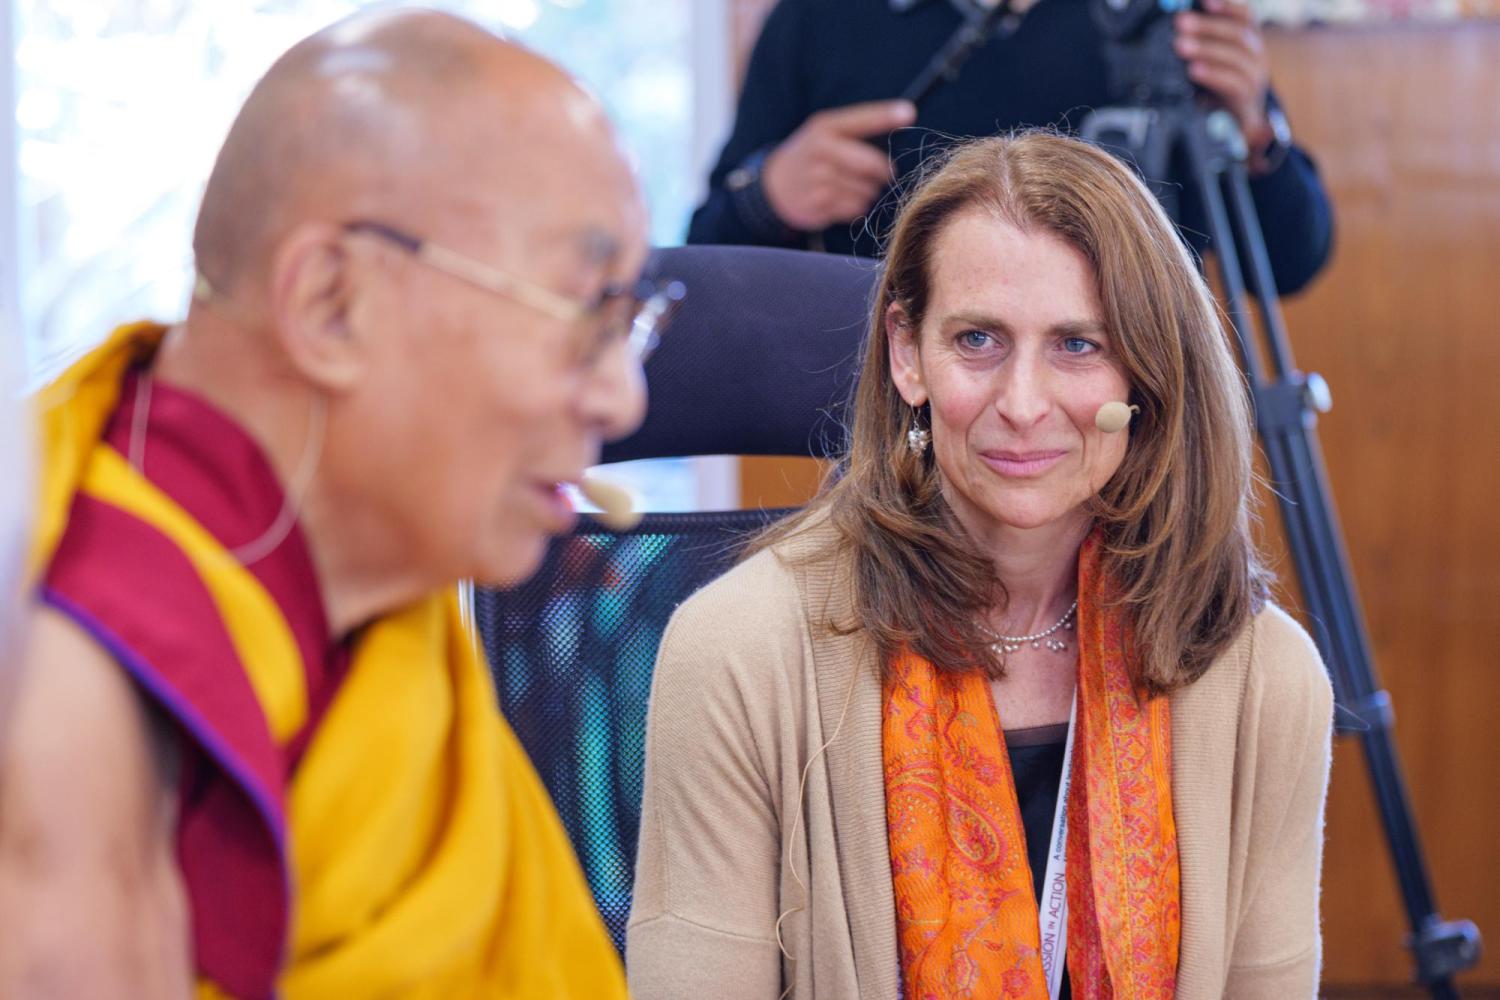 Sona and HHDL